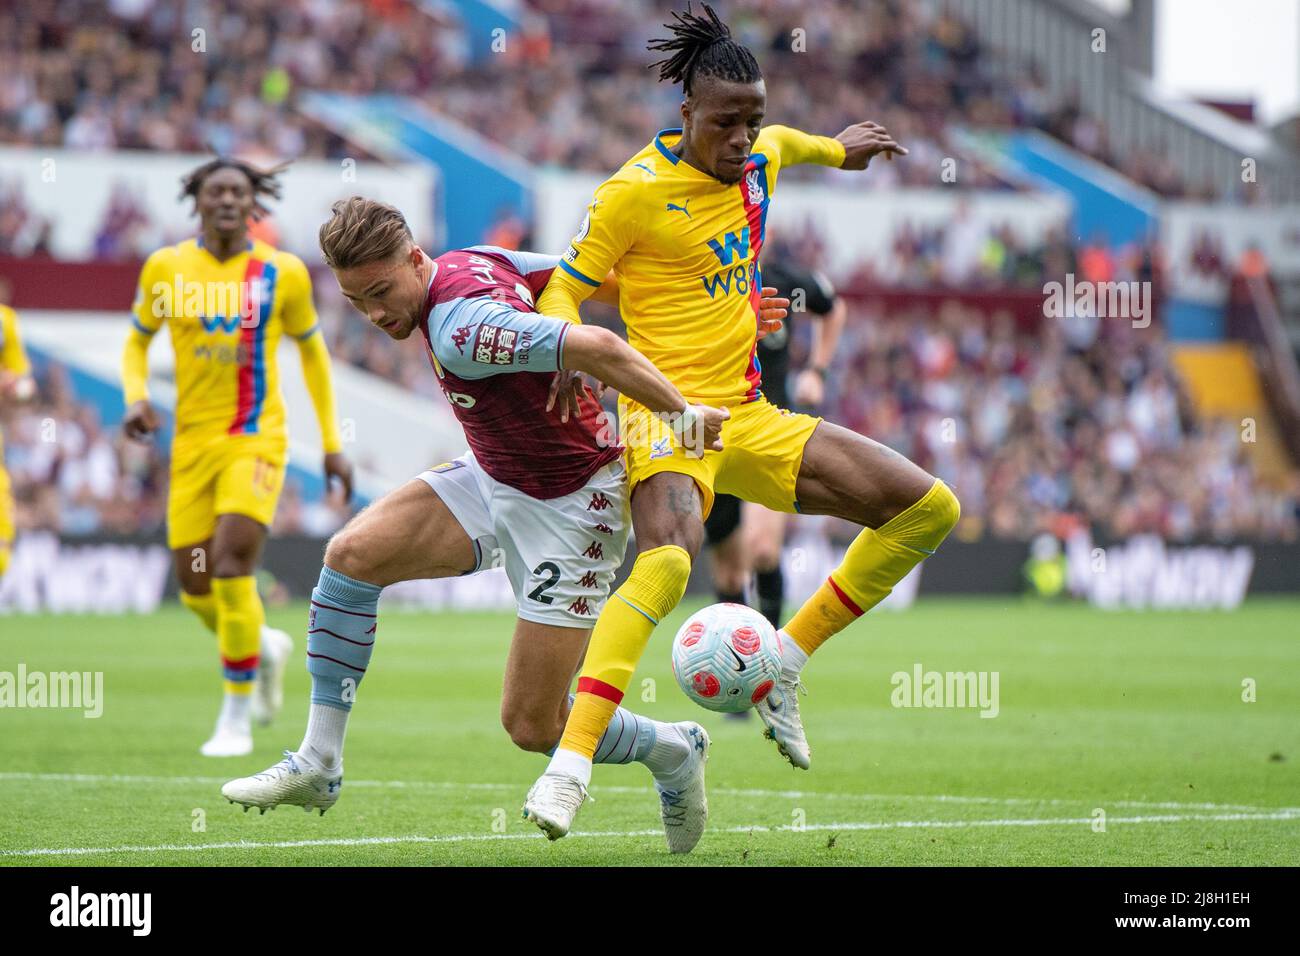 BIRMINGHAM, ENGLAND - MAY 15: Matty Cash of Aston Villa and Wilfried Zaha of Crystal Palace in action during the Premier League match between Aston Vi Stock Photo